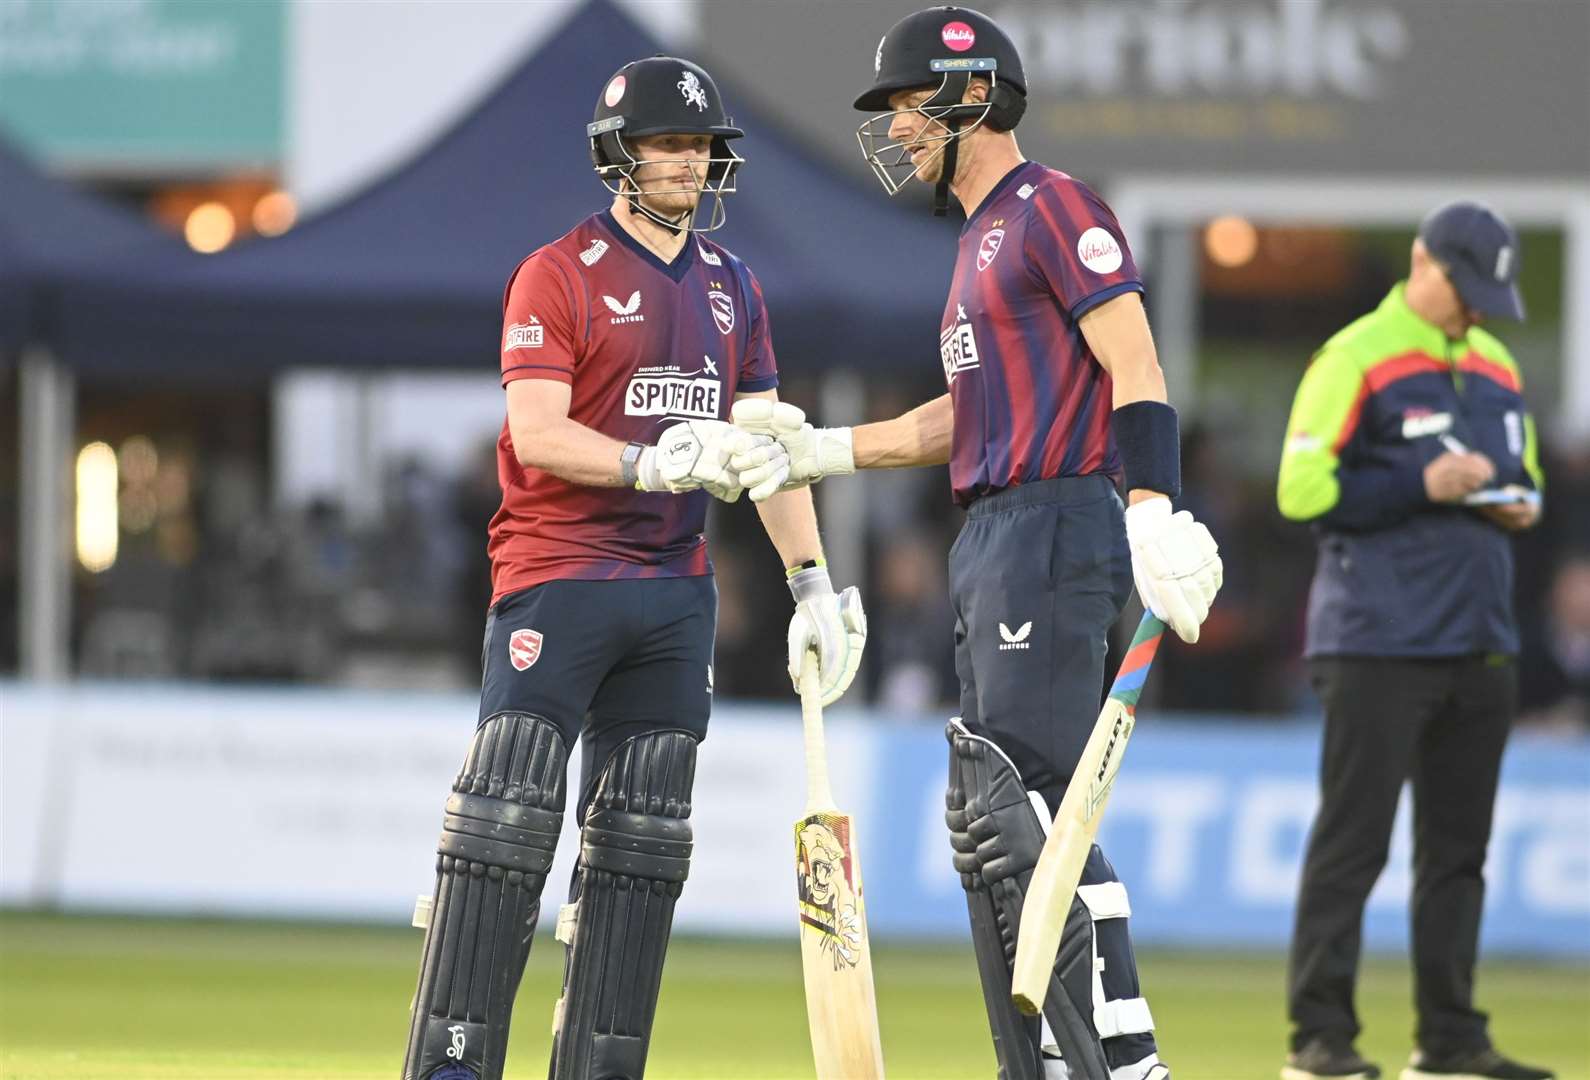 Joe Denly and Jordan Cox saw Kent Spitfires to a campaign-opening win over Gloucestershire with an unbeaten 45-run stand. Picture: Barry Goodwin